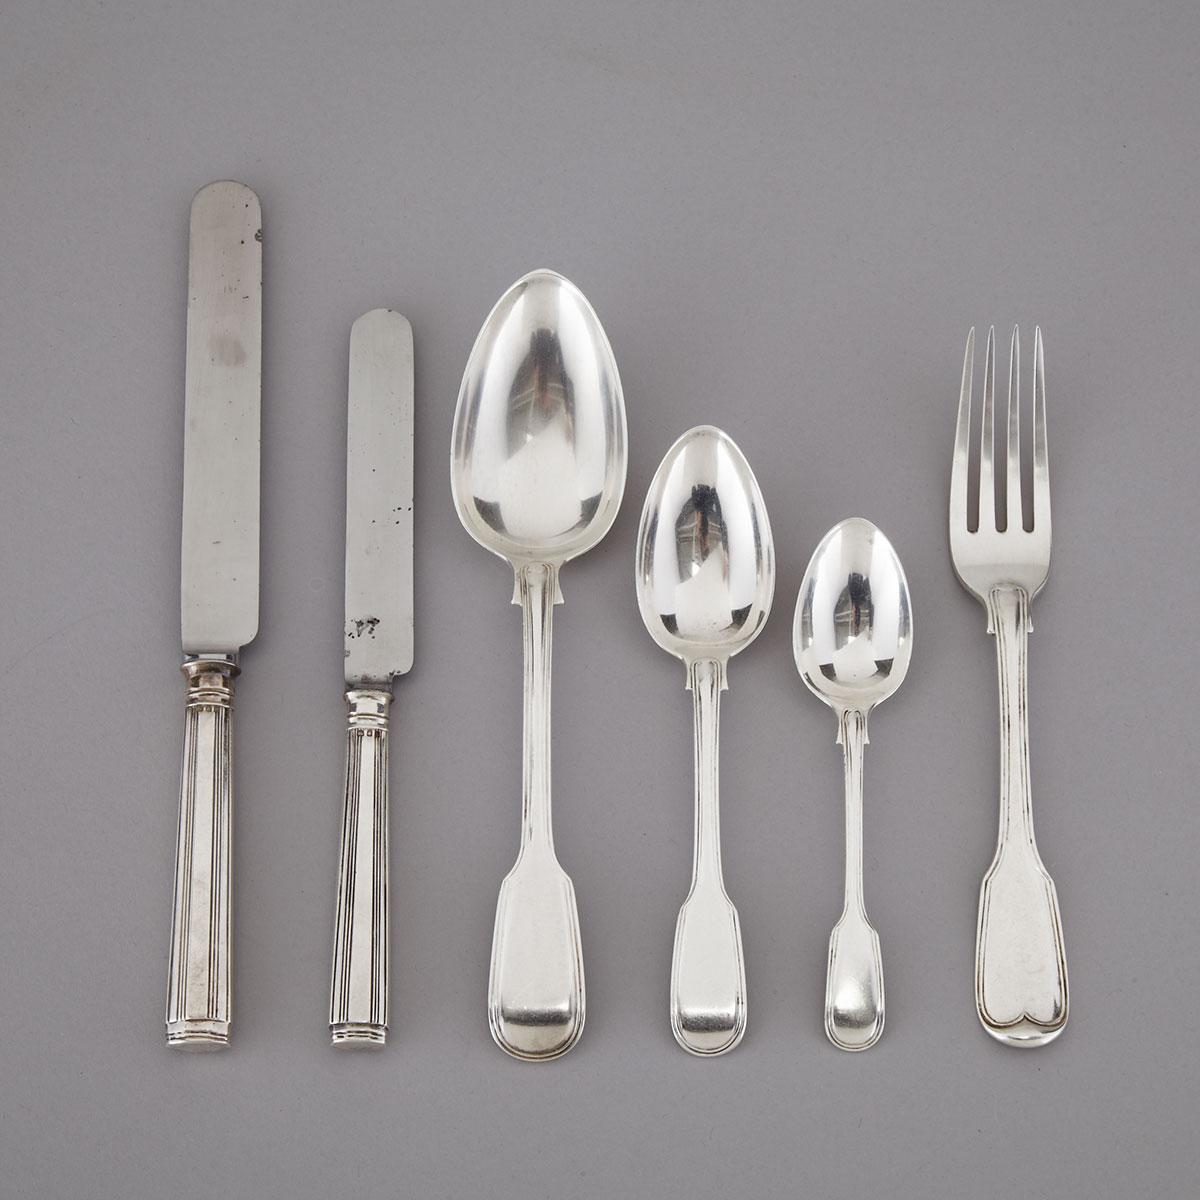 Victorian Silver Fiddle and Thread Pattern Flatware Service, mainly William Eaton, London, 1842-44